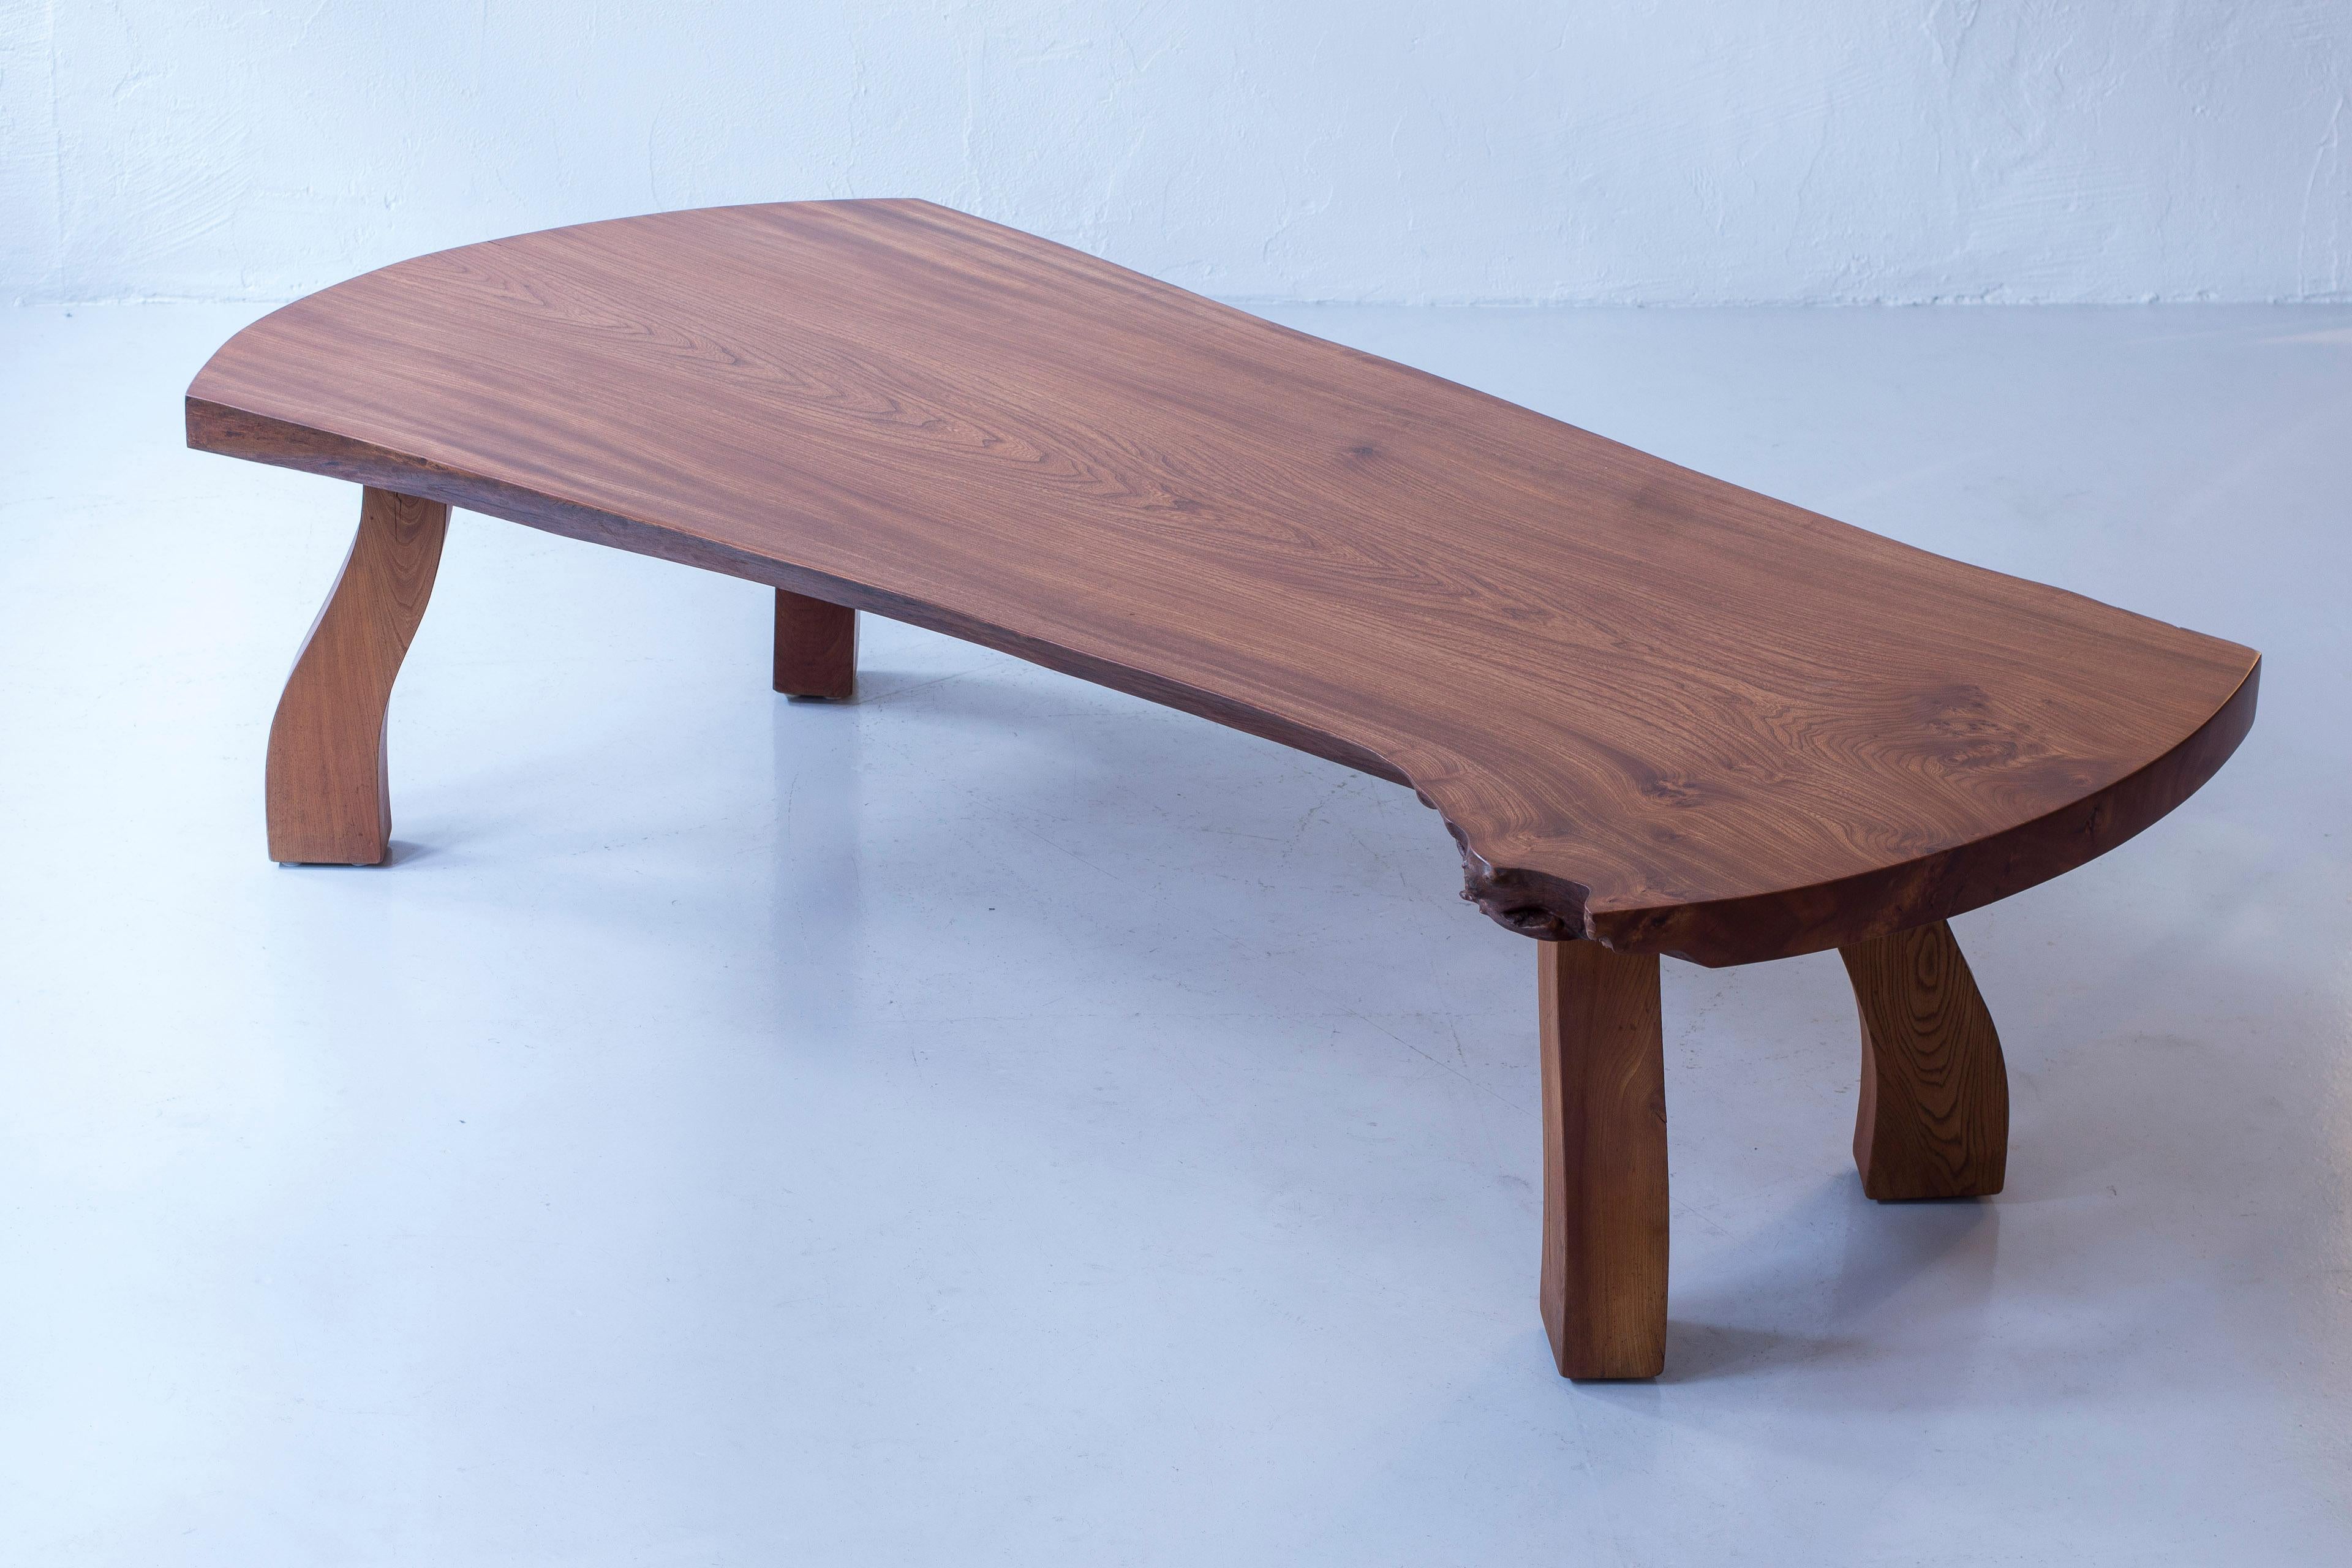 Slab table in solid elm, so called 